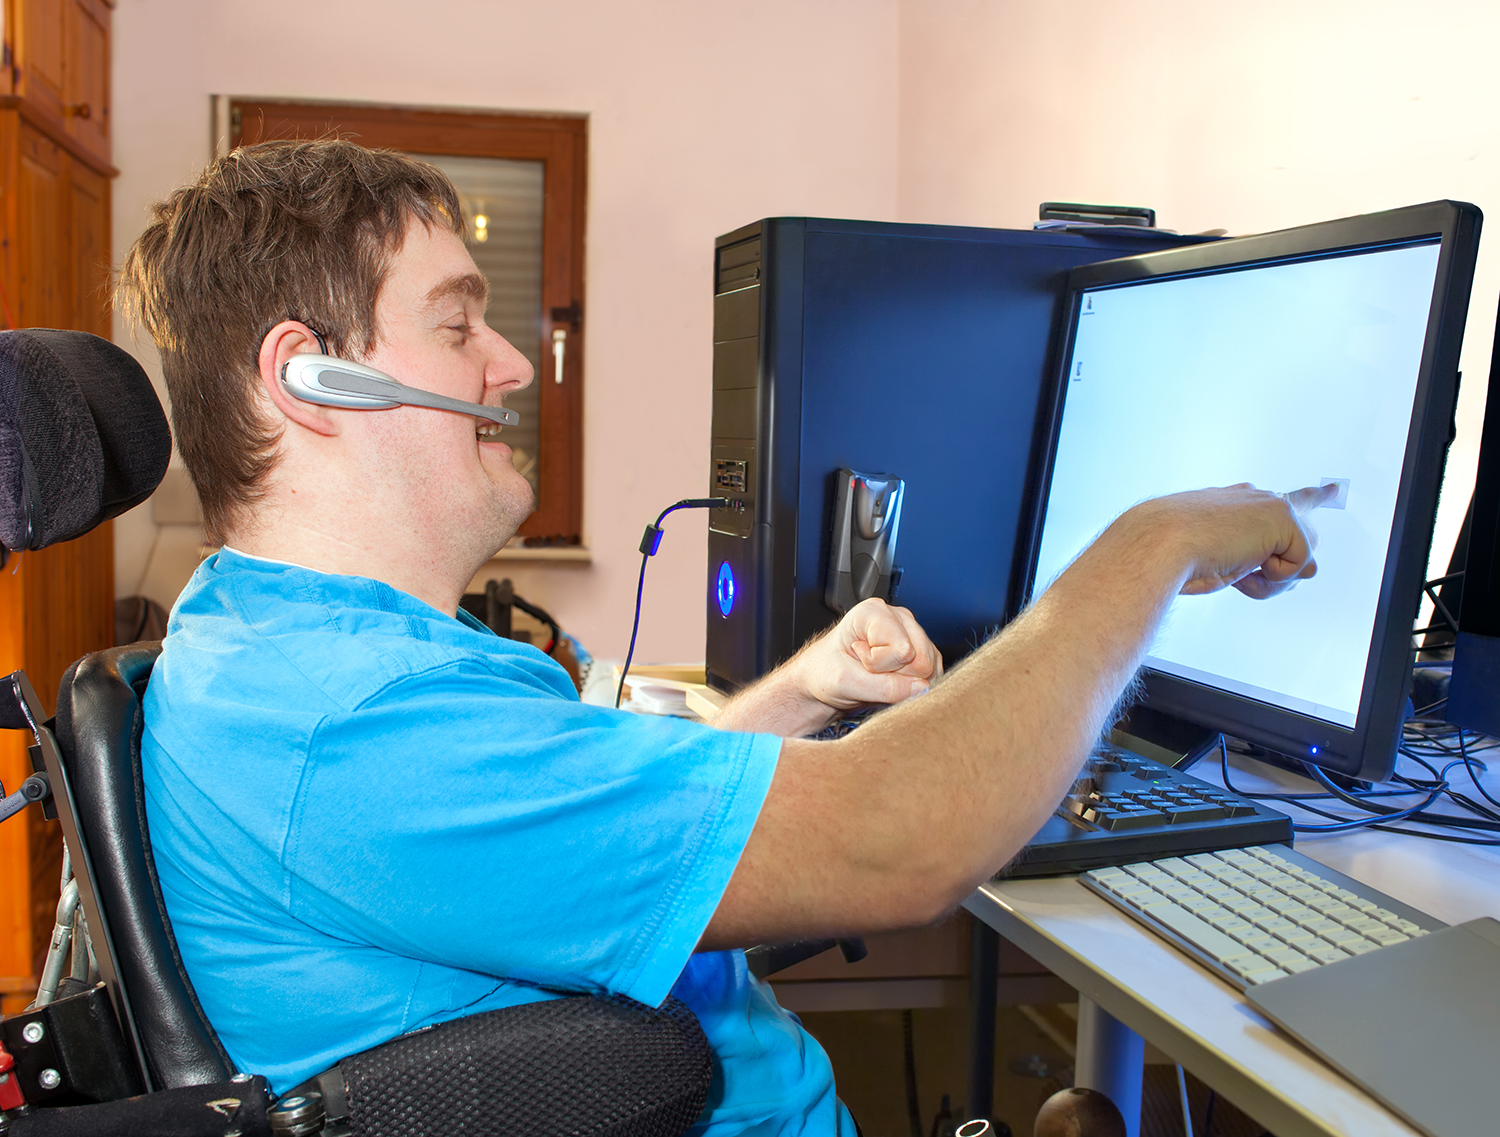 man with disability using computer